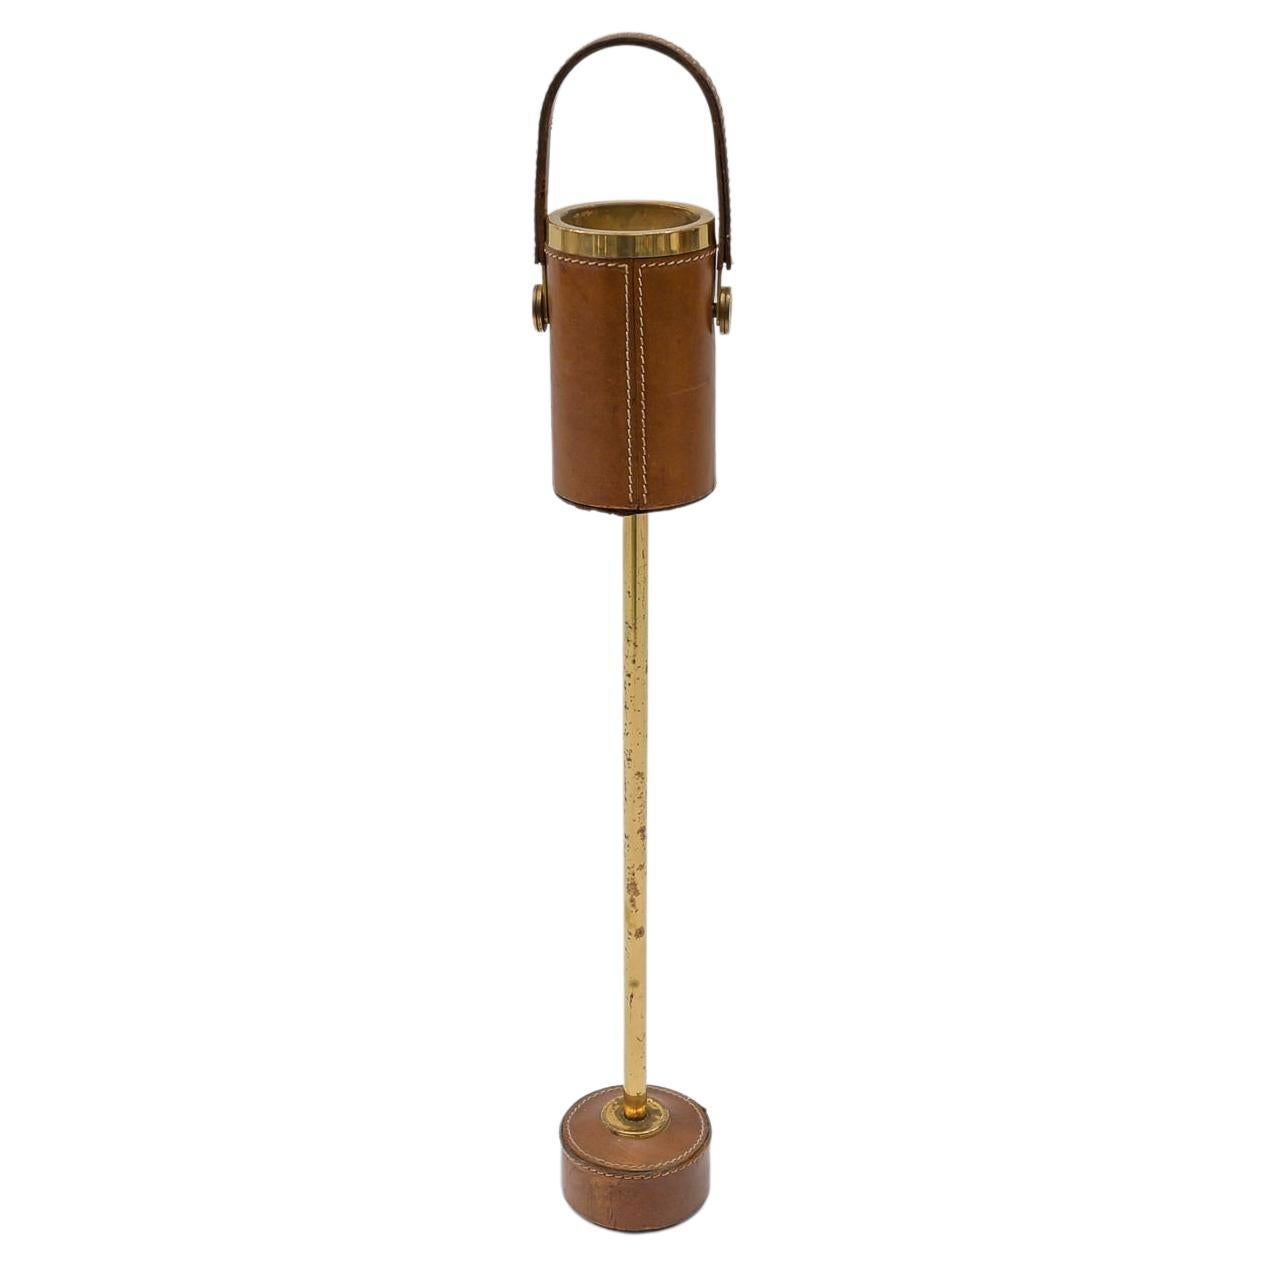 Portable Ashtray Stand in the Manner of Jacques Adnet, Brass and Leather, 1950s